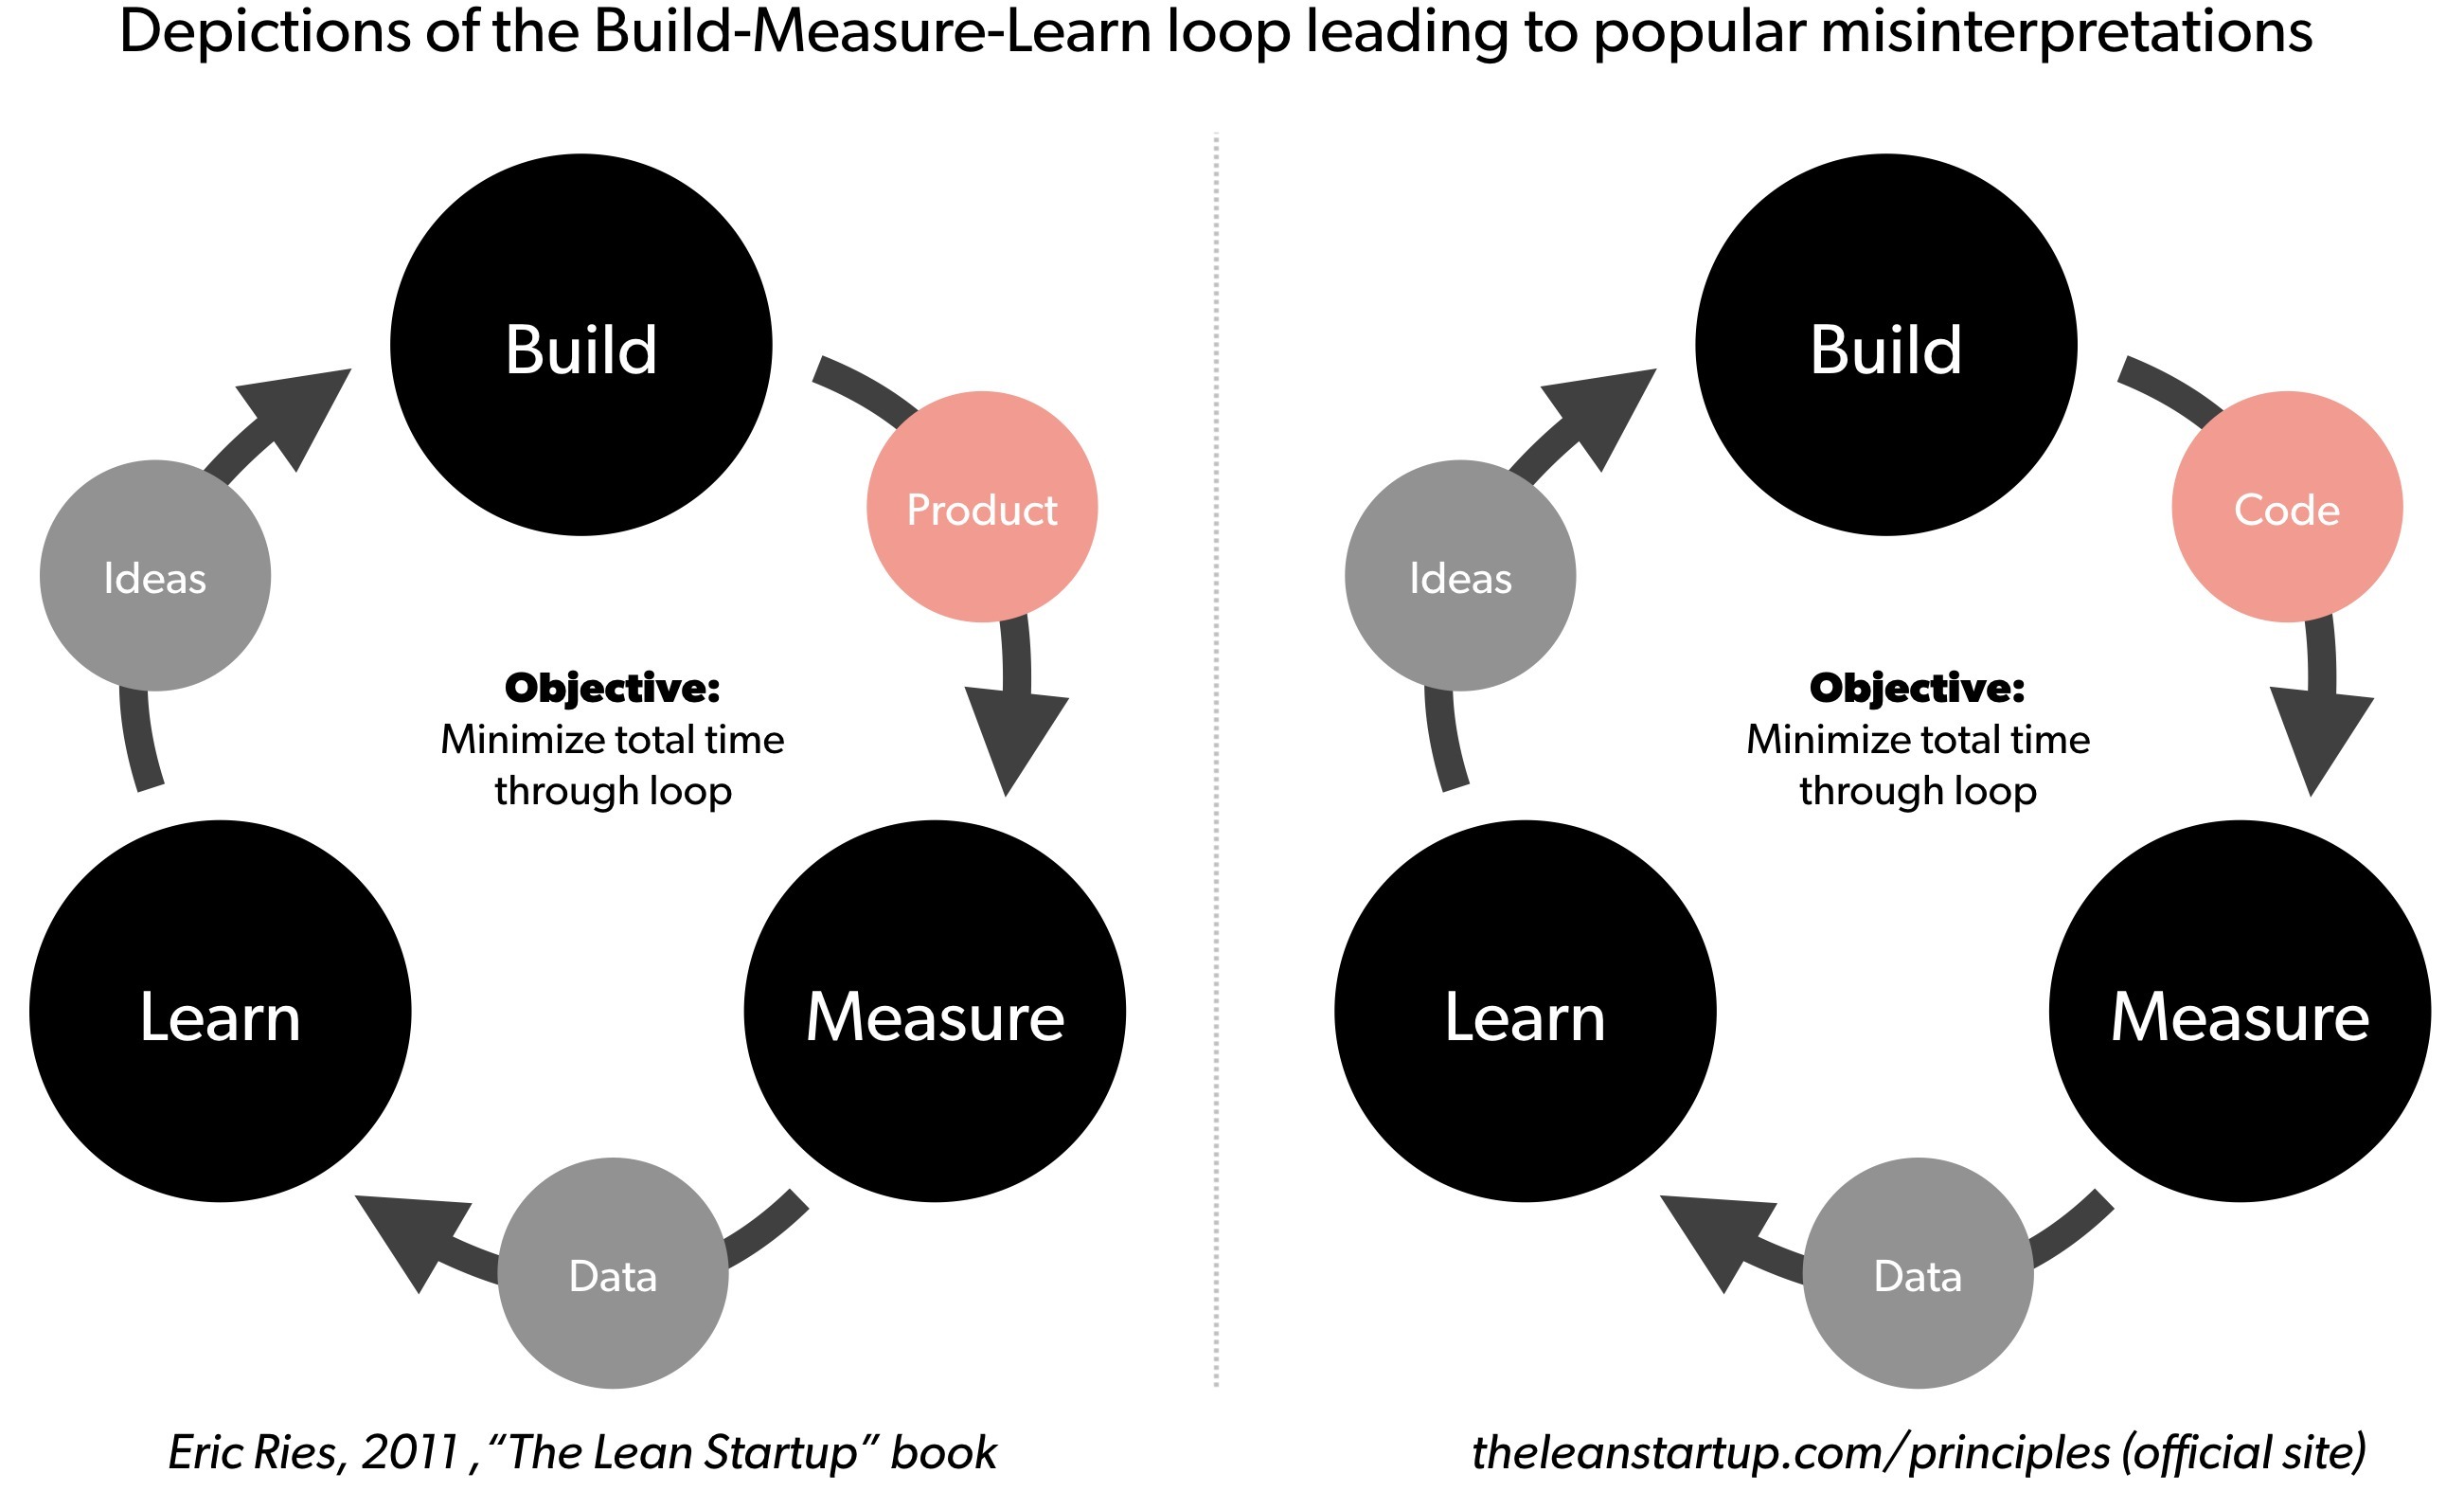 Depictions of the Build-Measure-Learn loop leading to popular misinterpretations by Eric Ries - first in his book and later on his official Lean Startup website.